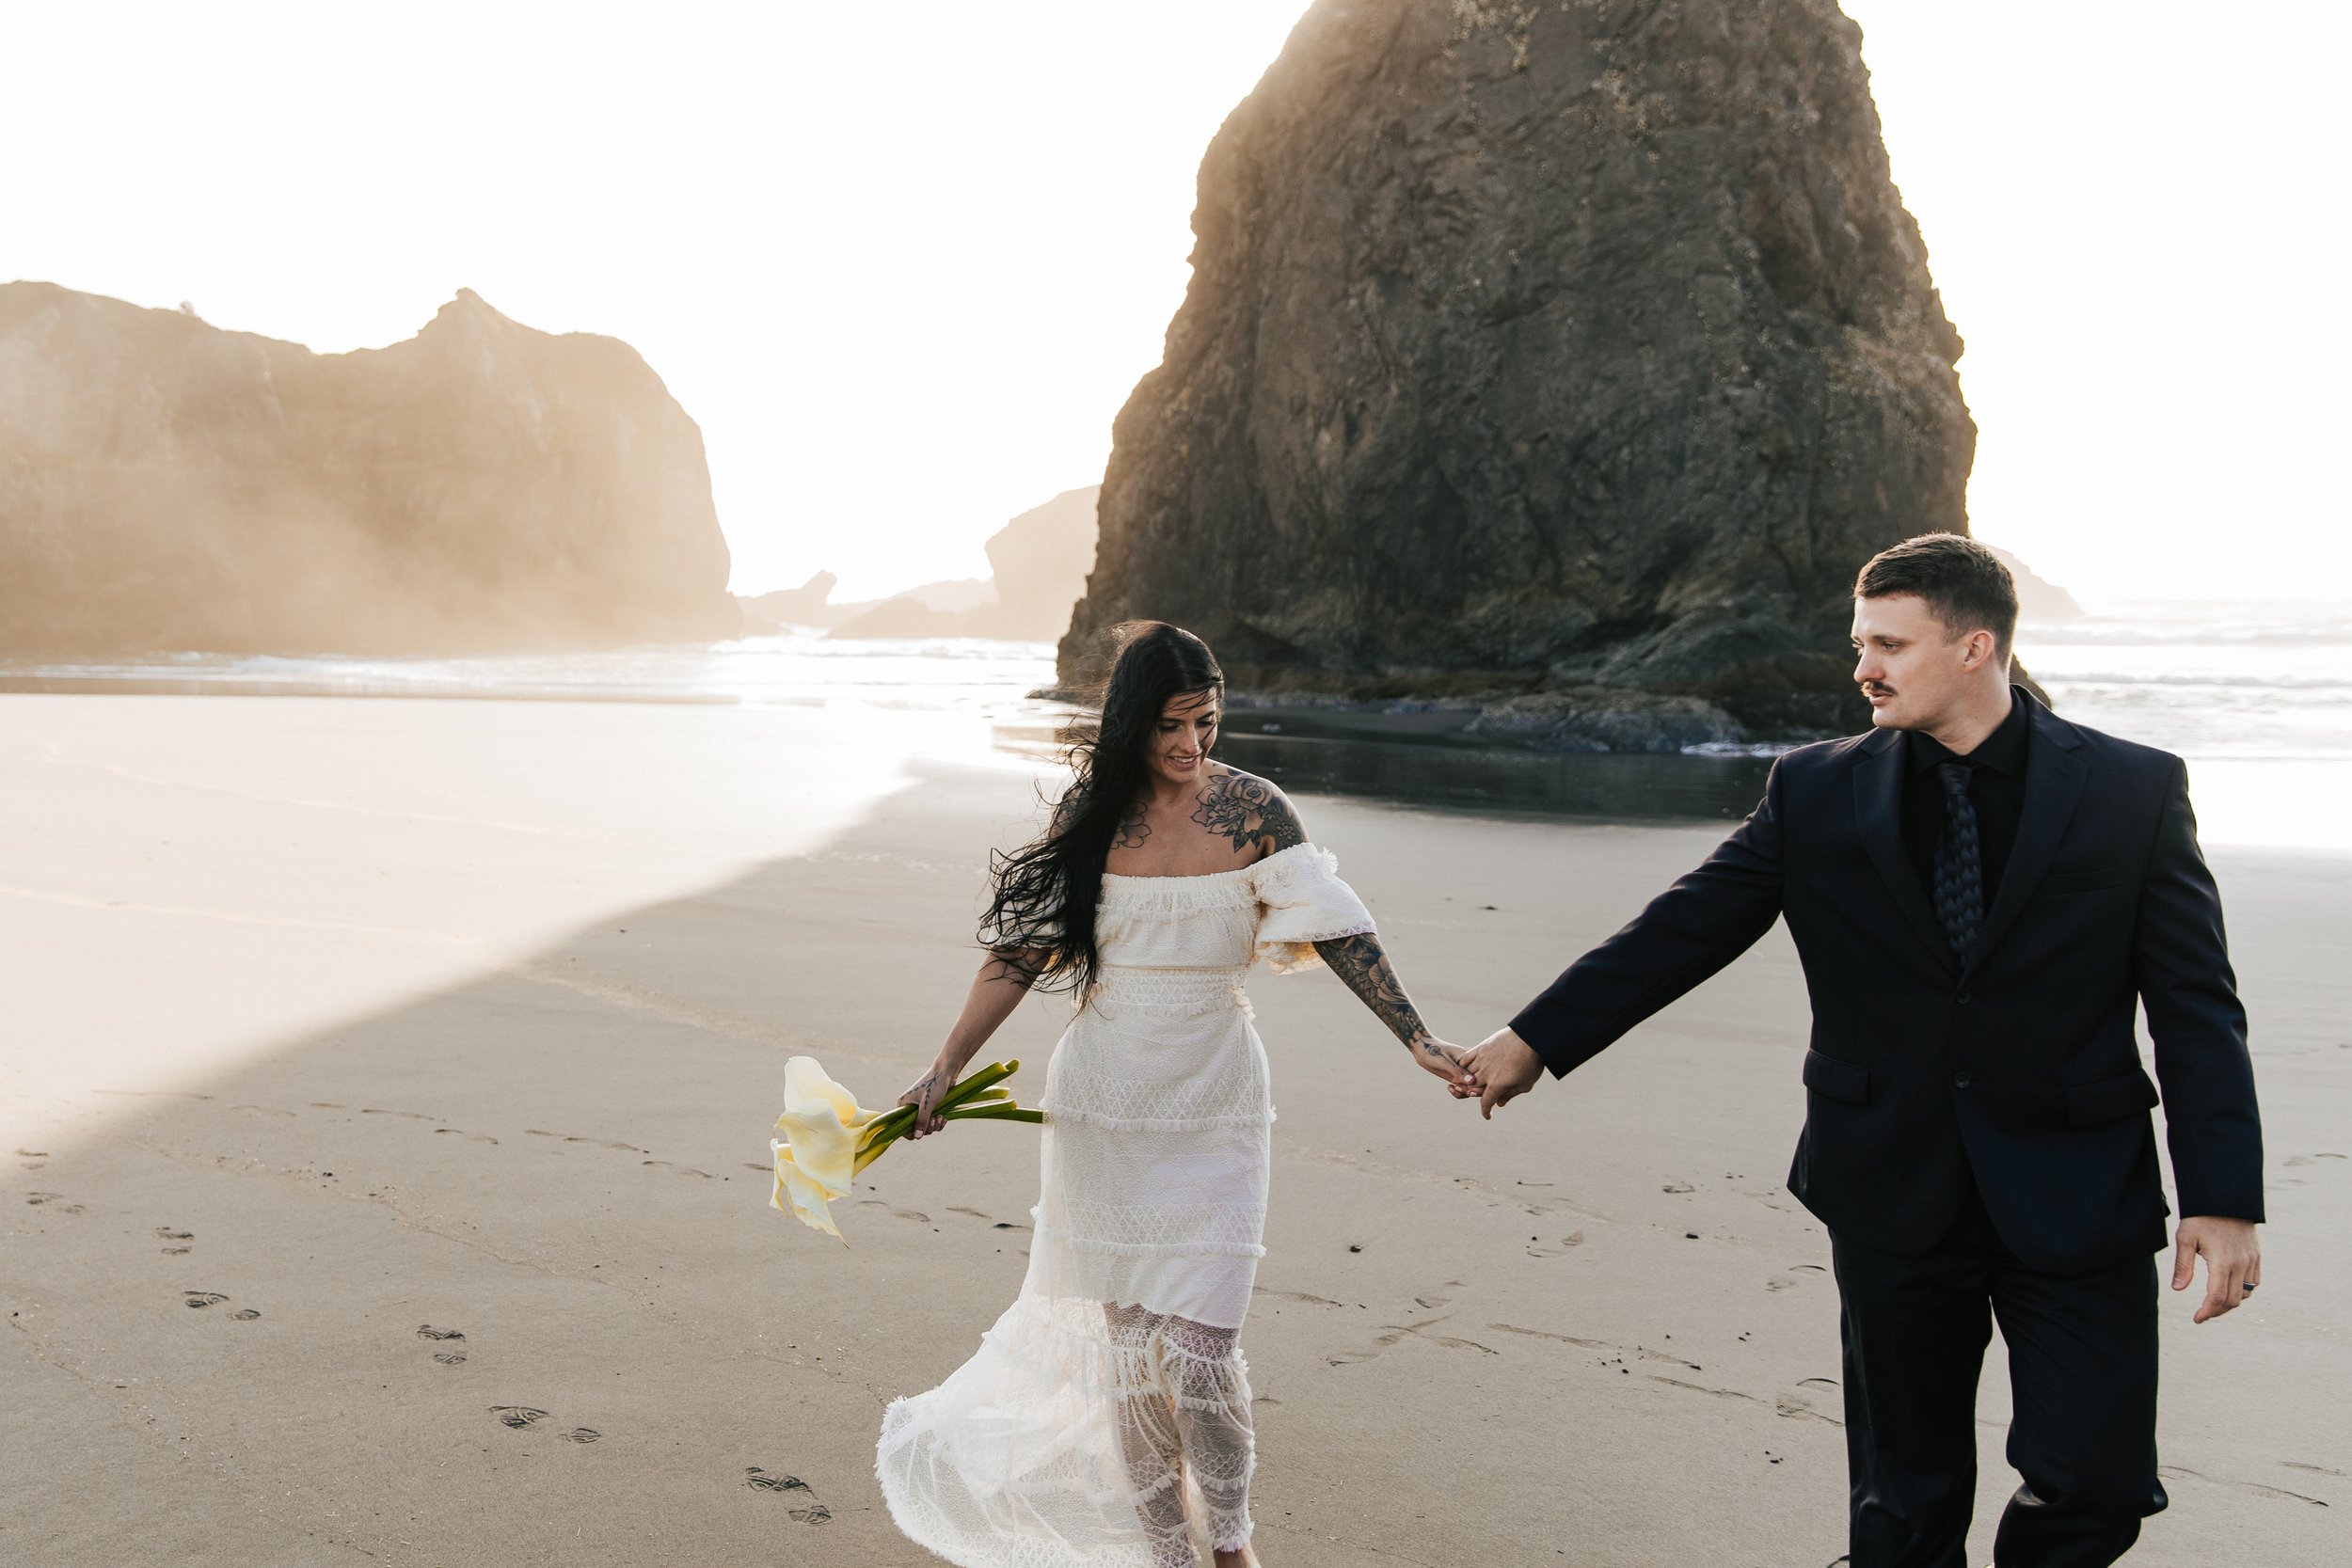  Oregon coast elopement. Couple elopes on the beach with the sun shining behind them. Sun rays behind rocks. Beach with rocks and haystacks. Southern Oregon. Couple runs together on the beach after elopement ceremony. #oregoncoast 